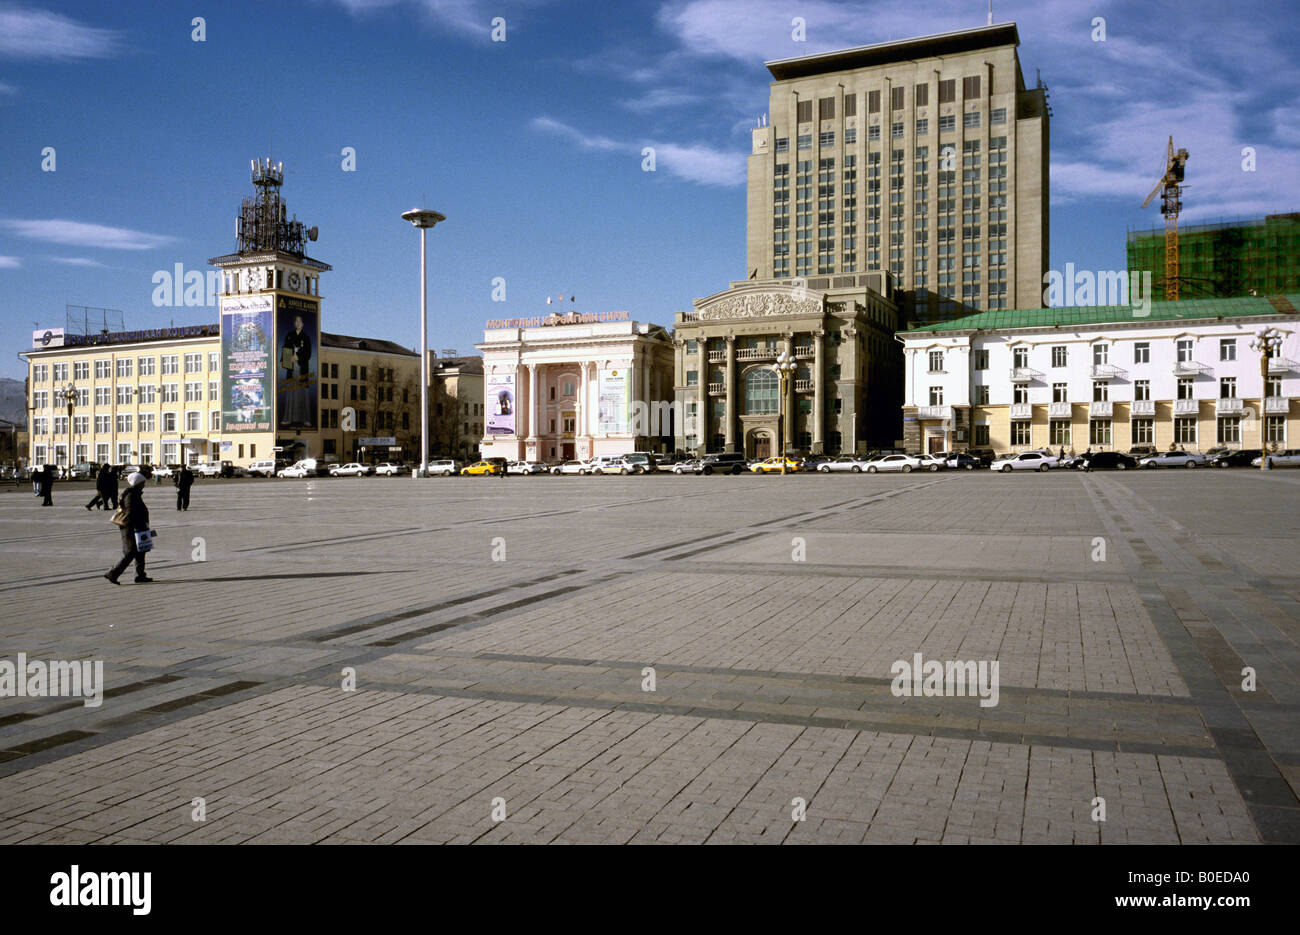 Oct 25, 2006 - Sukhe-Bator Square with Mongolian Telecom, ZOOS and Golomt Banks in the Mongolian captial of Ulaan-Baatar. Stock Photo